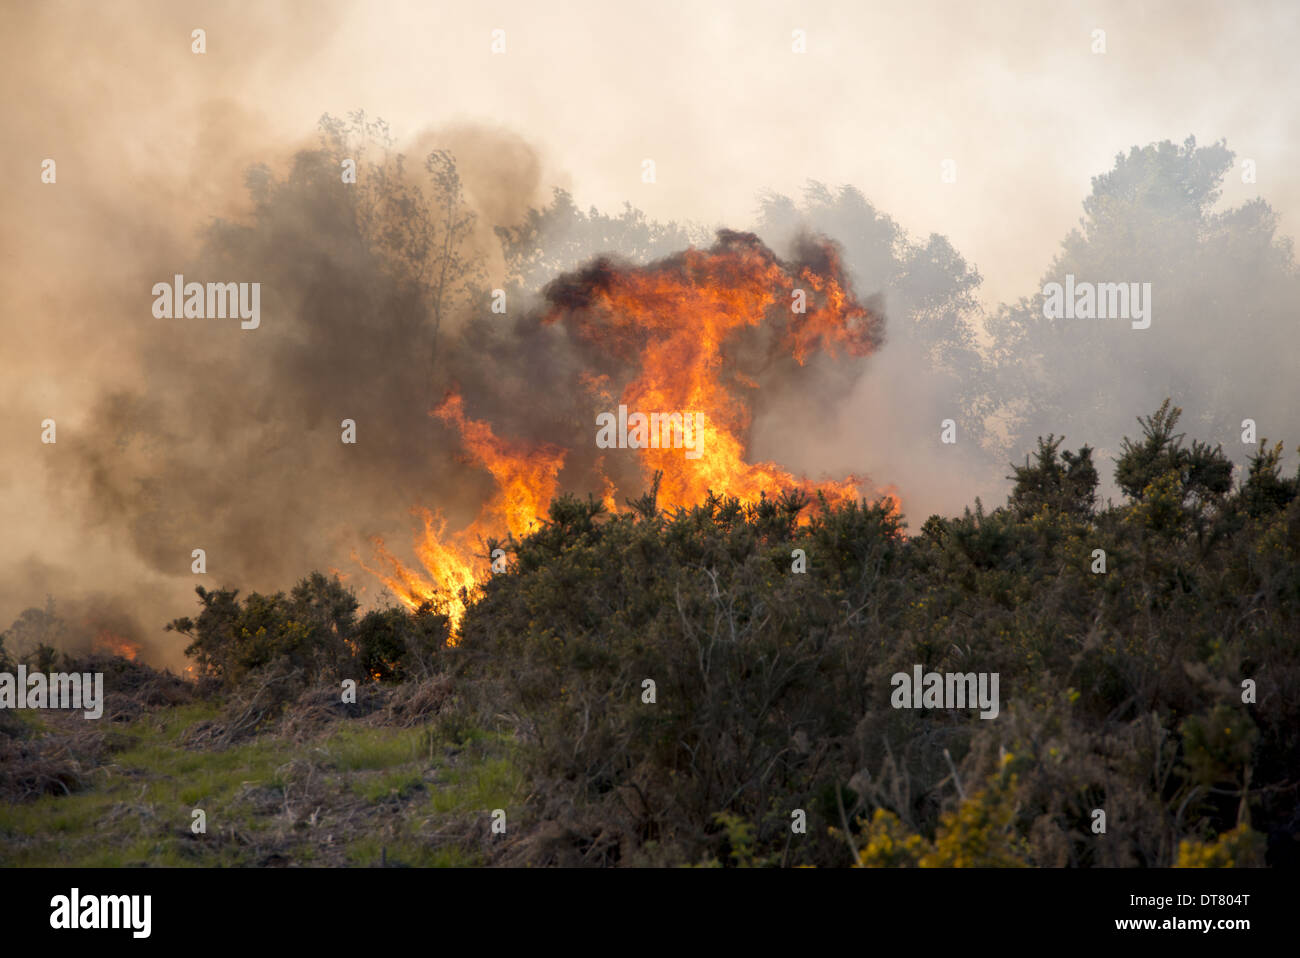 Fire on heathland caused by either carelessness or arson, Ashdown Forest, East Sussex, England, June Stock Photo